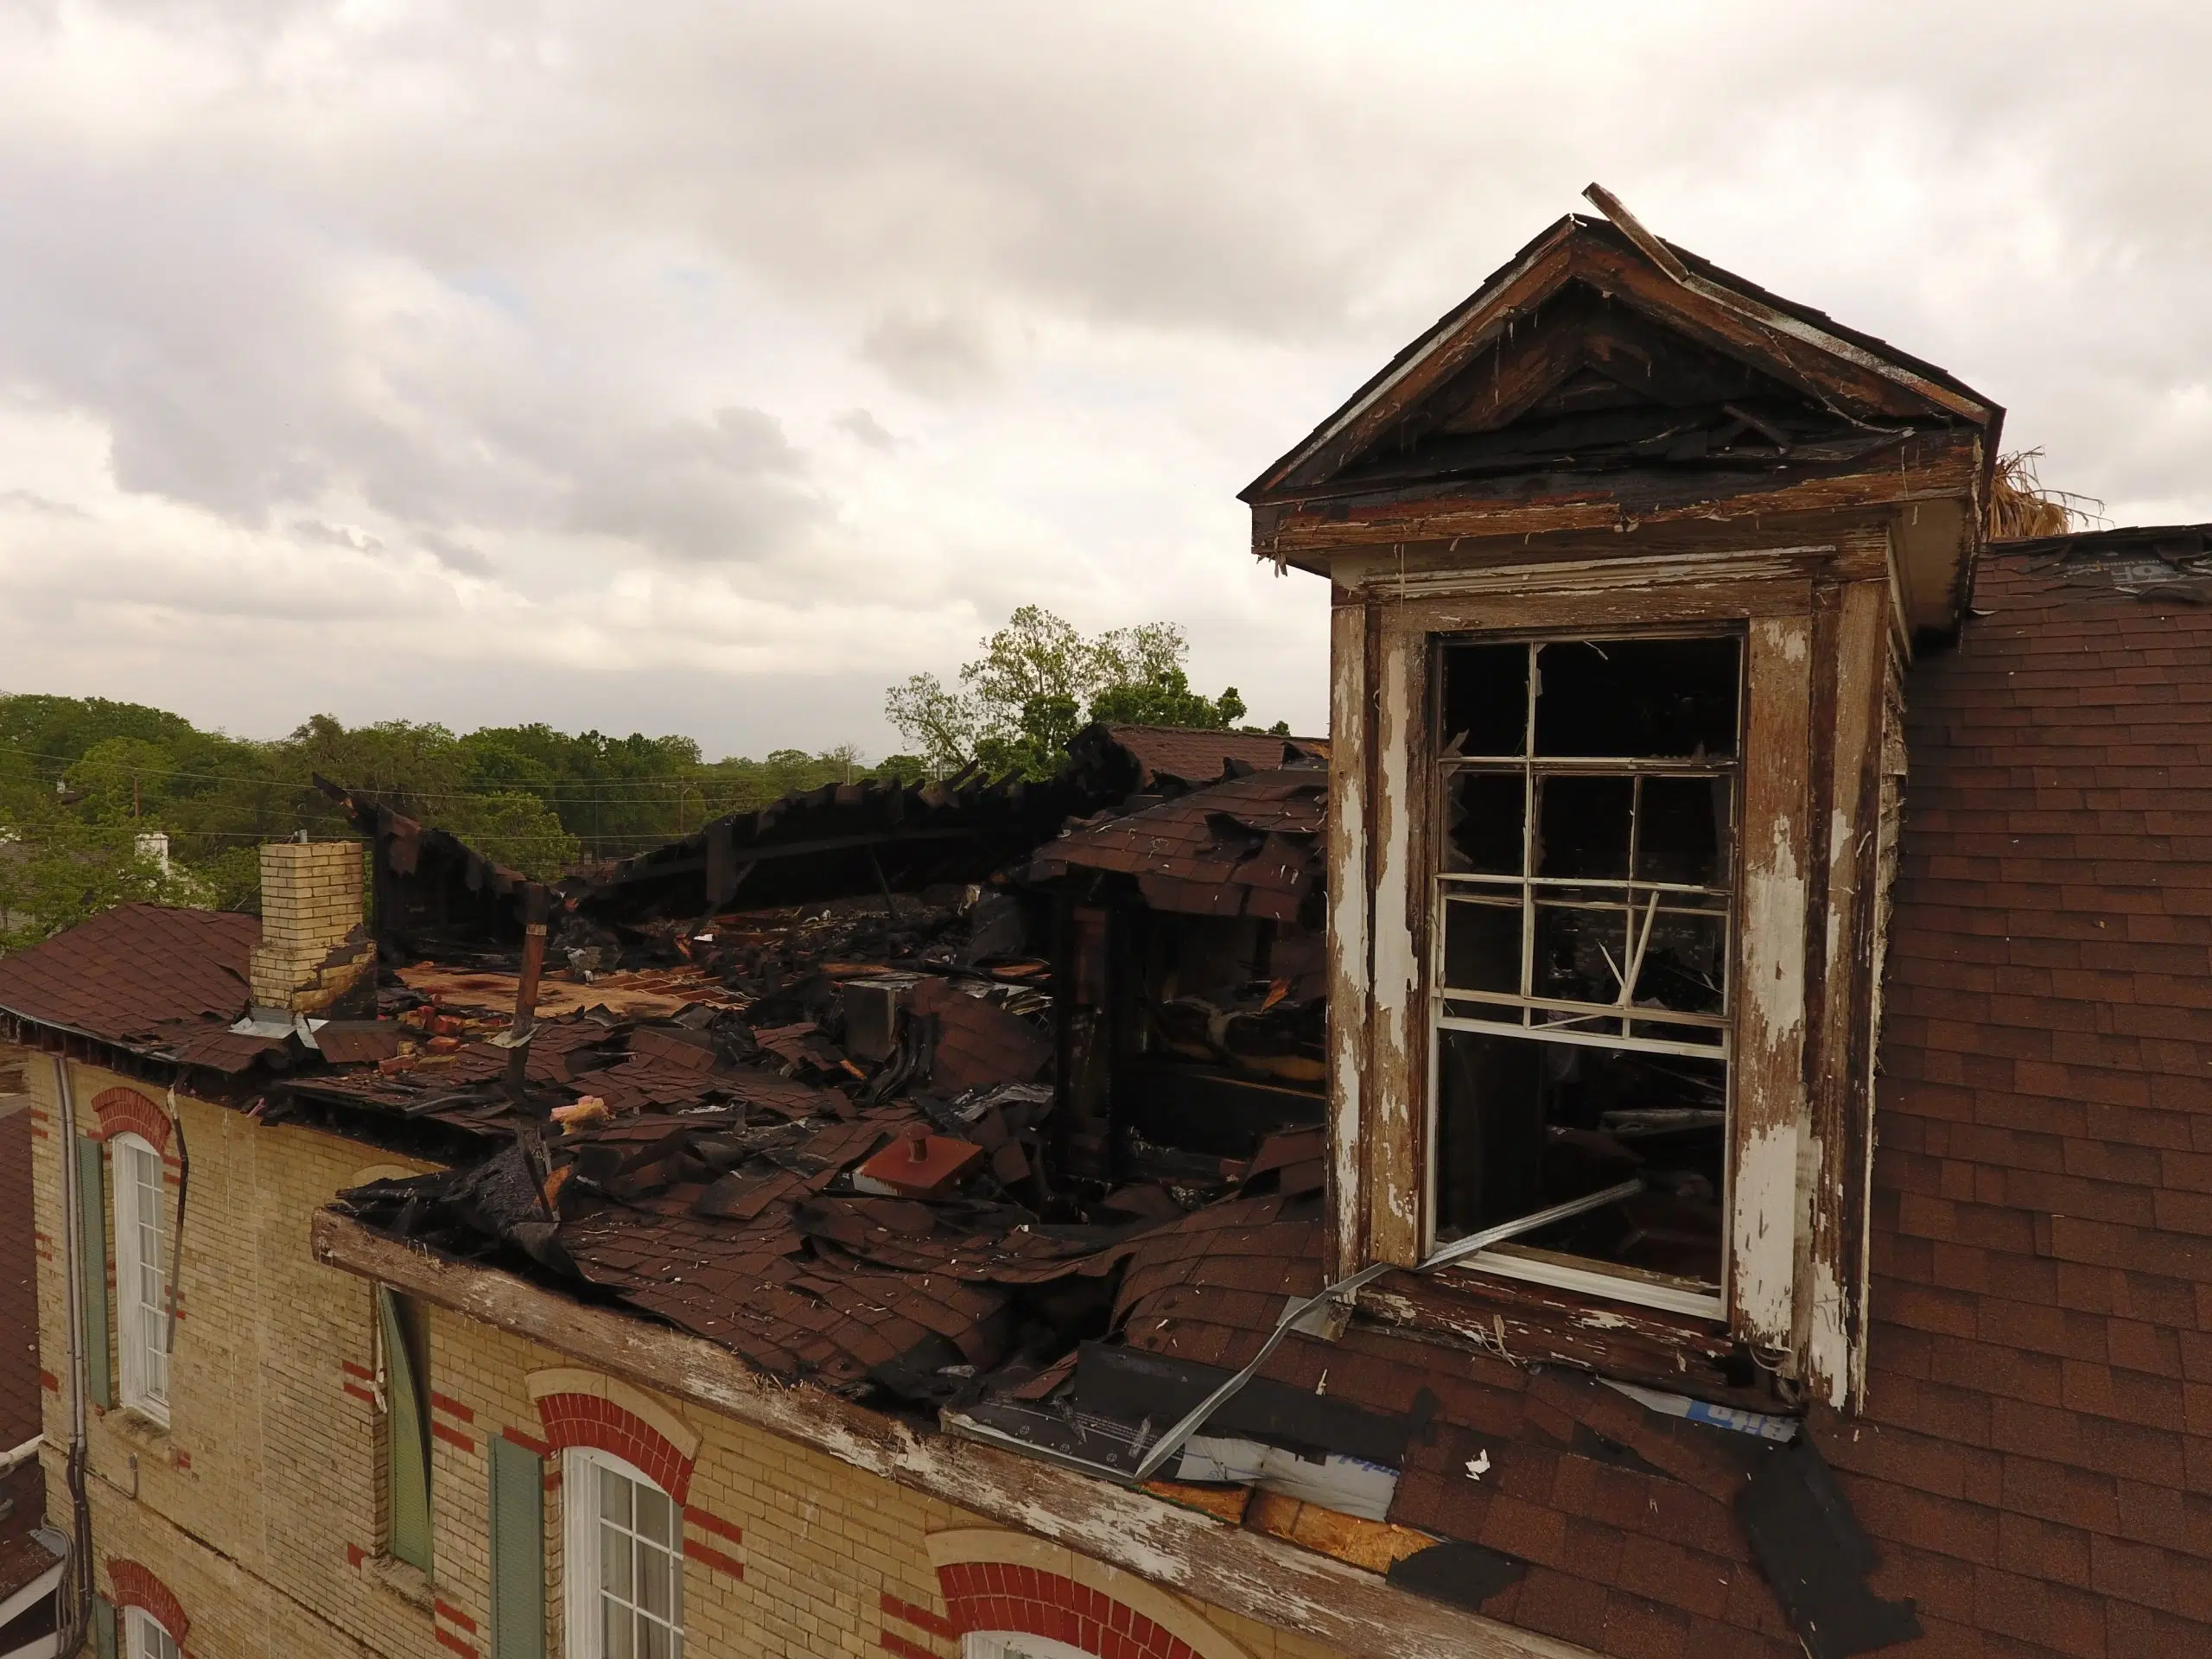 More details released on fire that damaged historic mansion